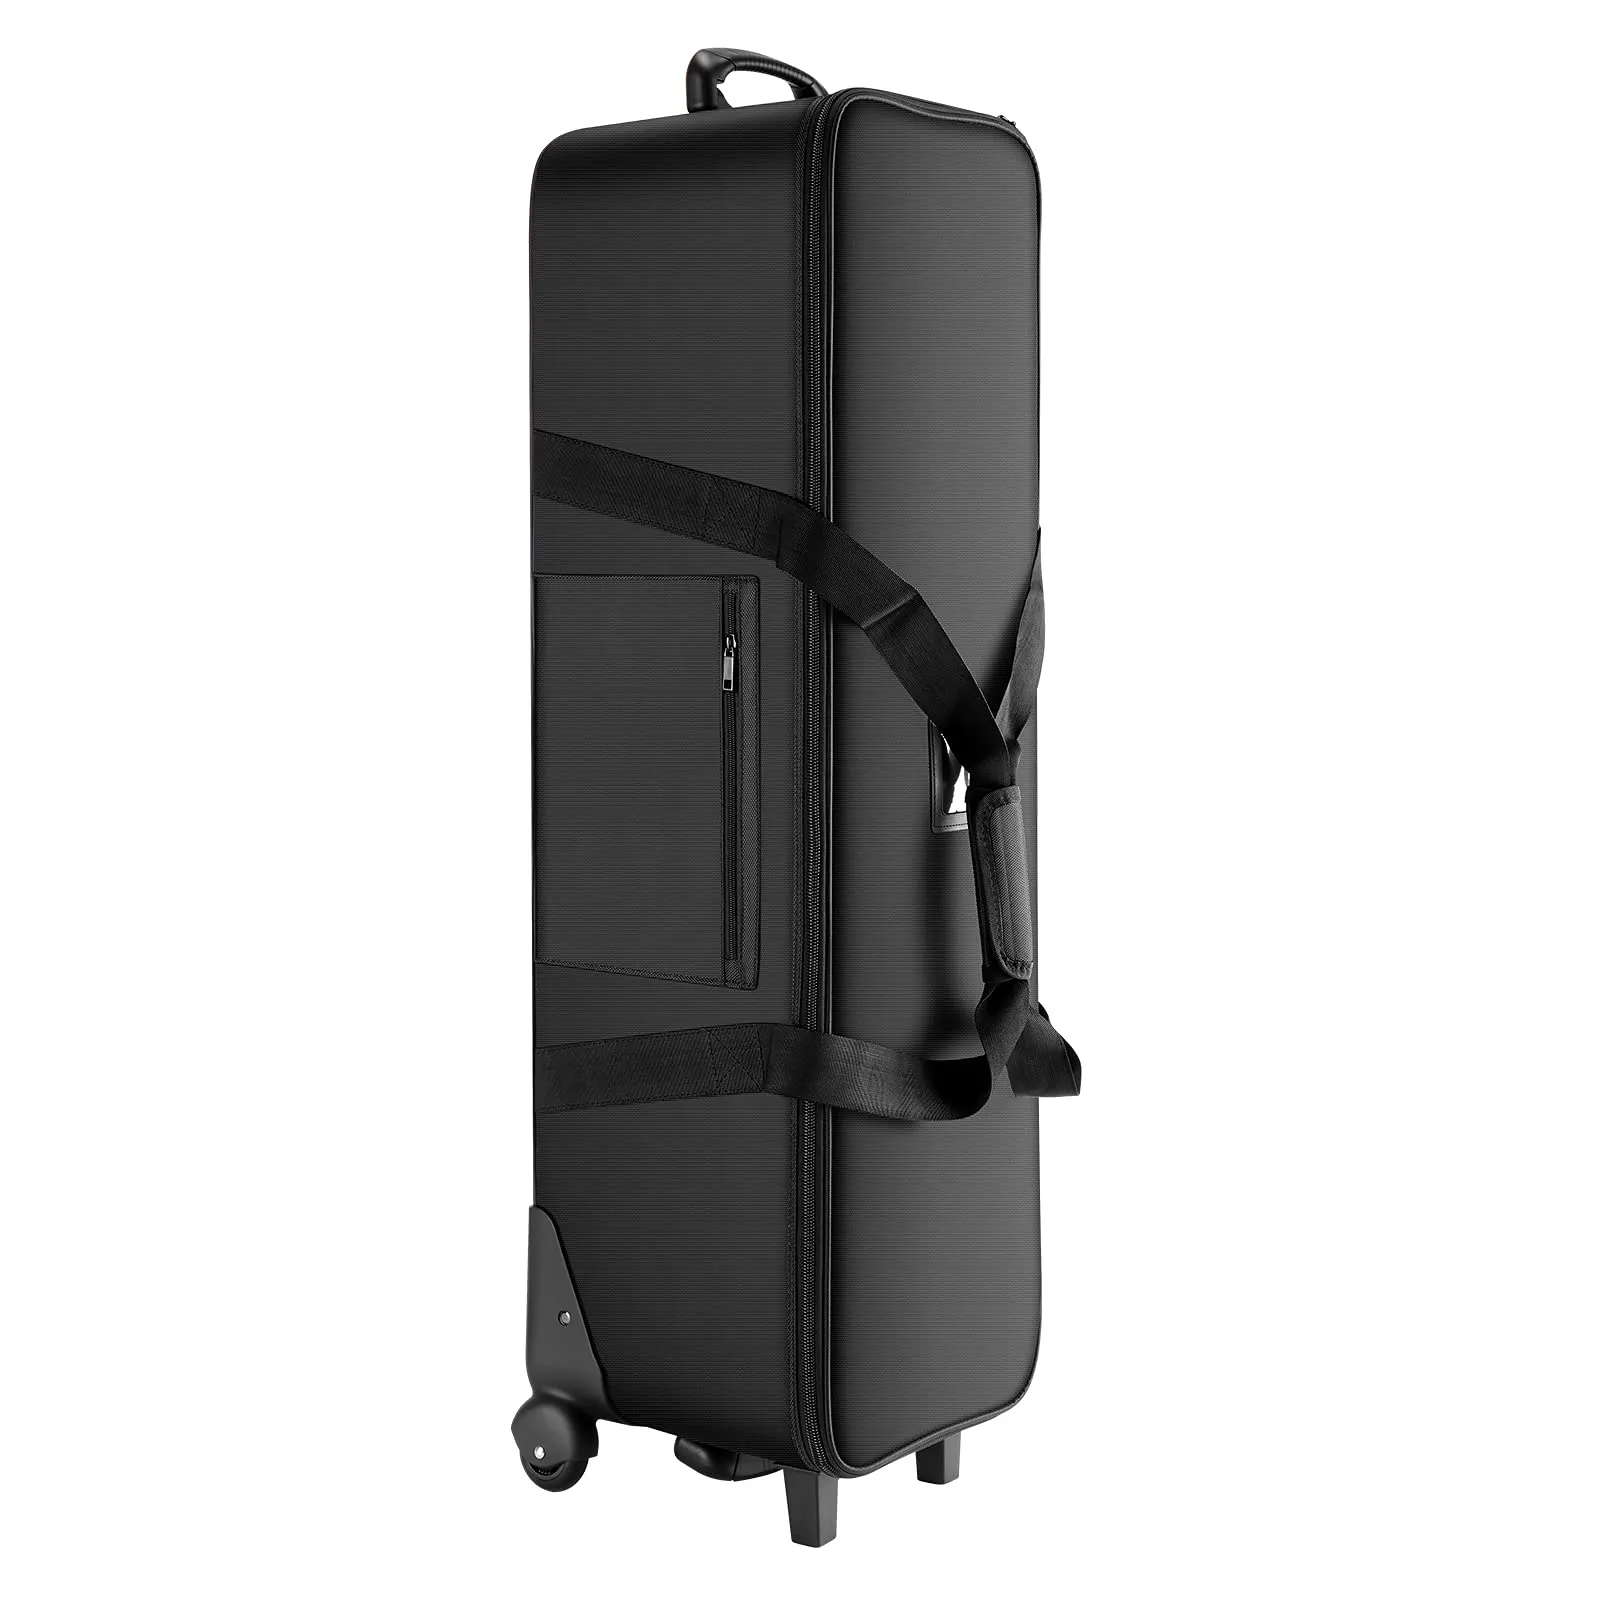 44.8"x14.1"x12.6" 50KG Photo Studio Equipment Padded Compartment Camera Trolley Carry Bag  with Wheels